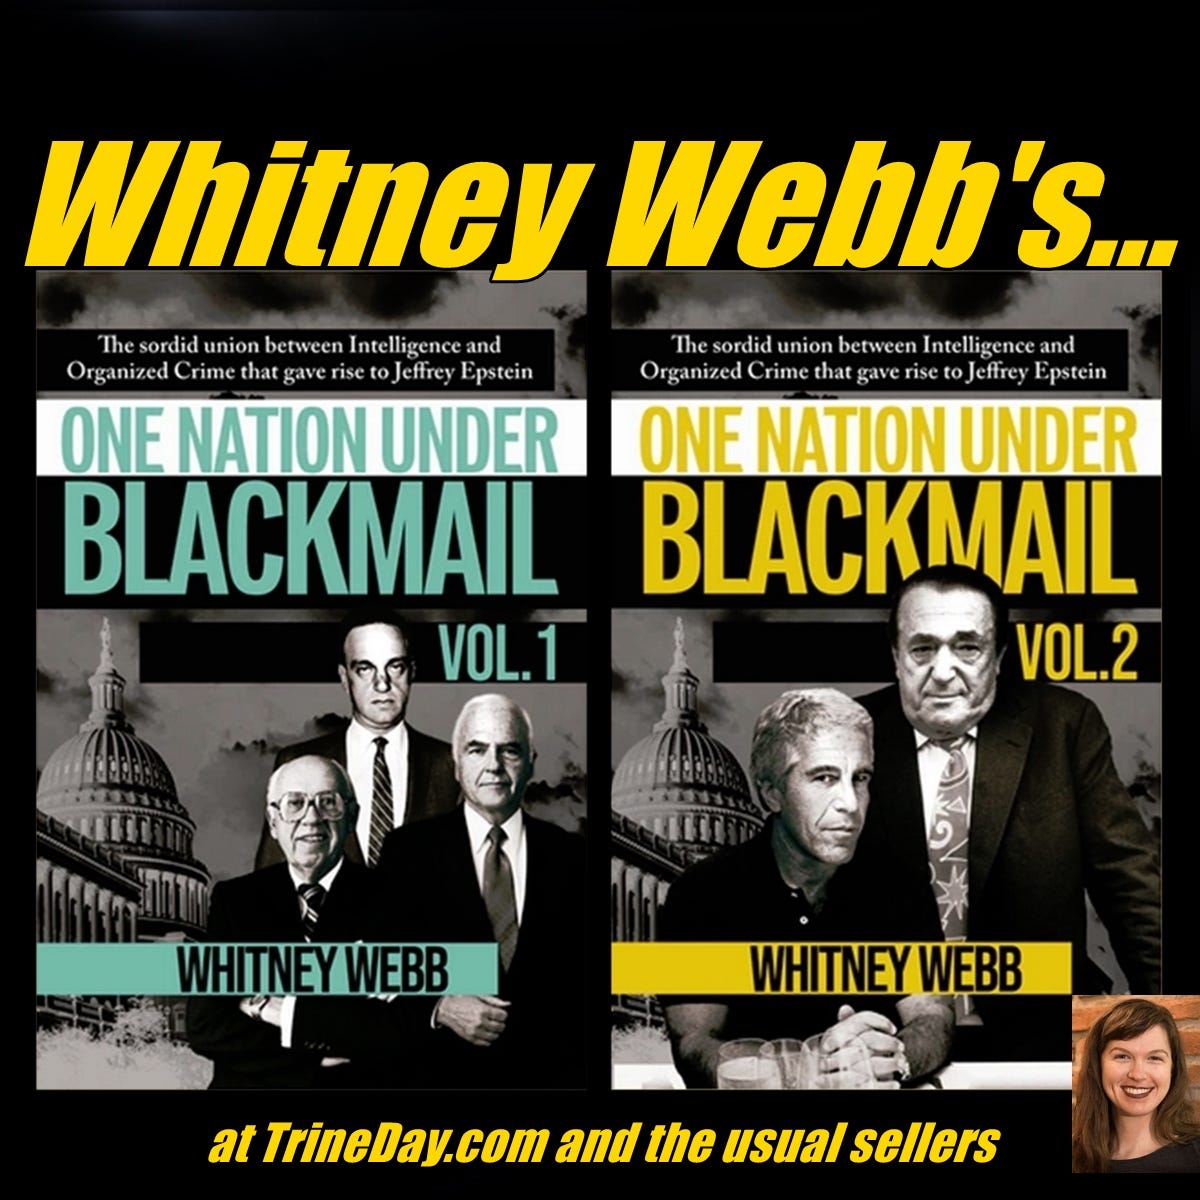 GLENN BECK, AND PATRICK BET-DAVID'S VIEWERS, ARE IMPRESSED BY WHITNEY WEBB